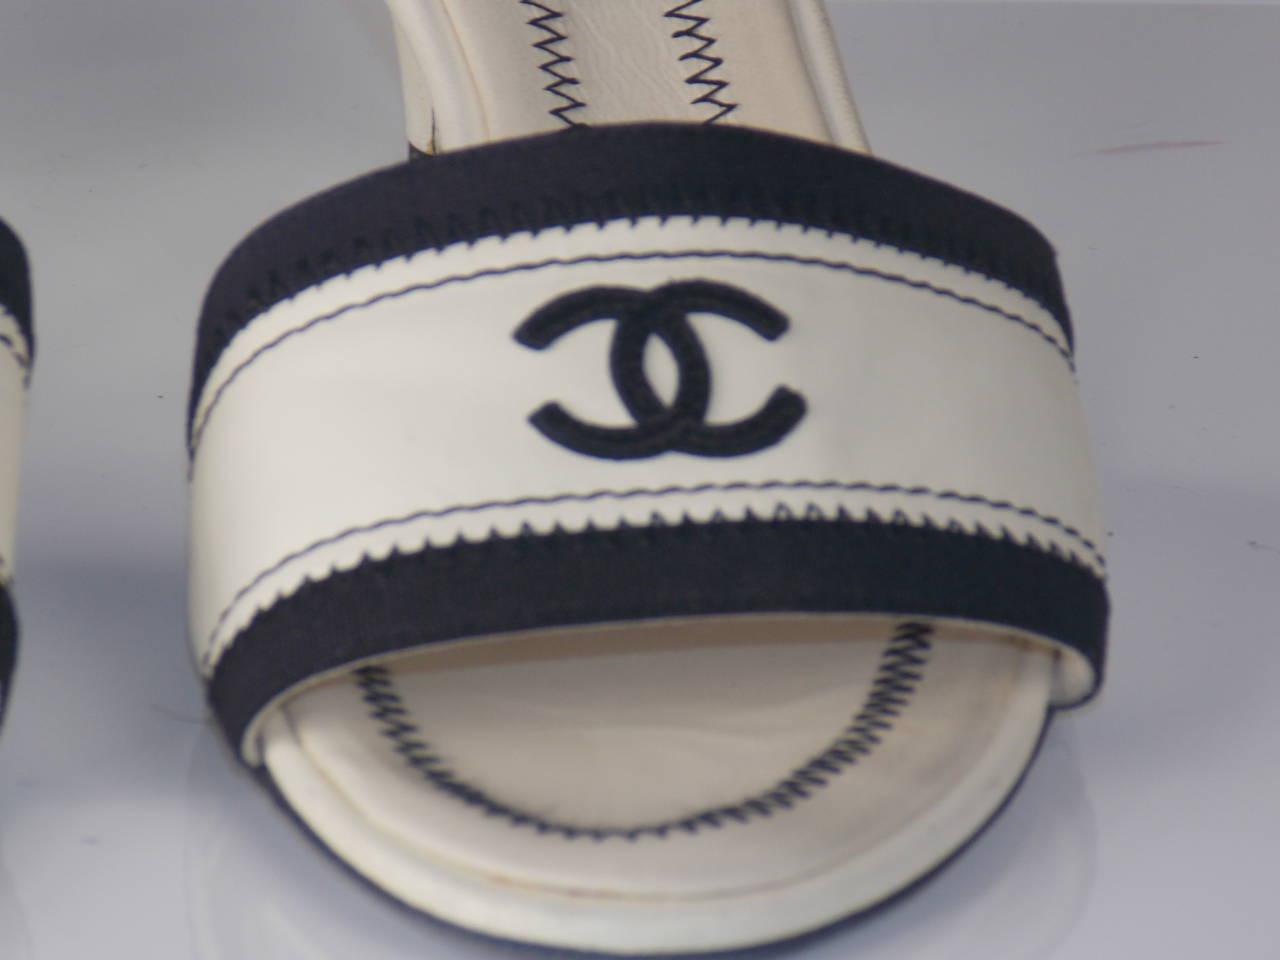 Chanel super chic mule, cream leather with kitten heel and stitched black CC logo on strap. The little sole on the heel looks new and the stitching is lovely.